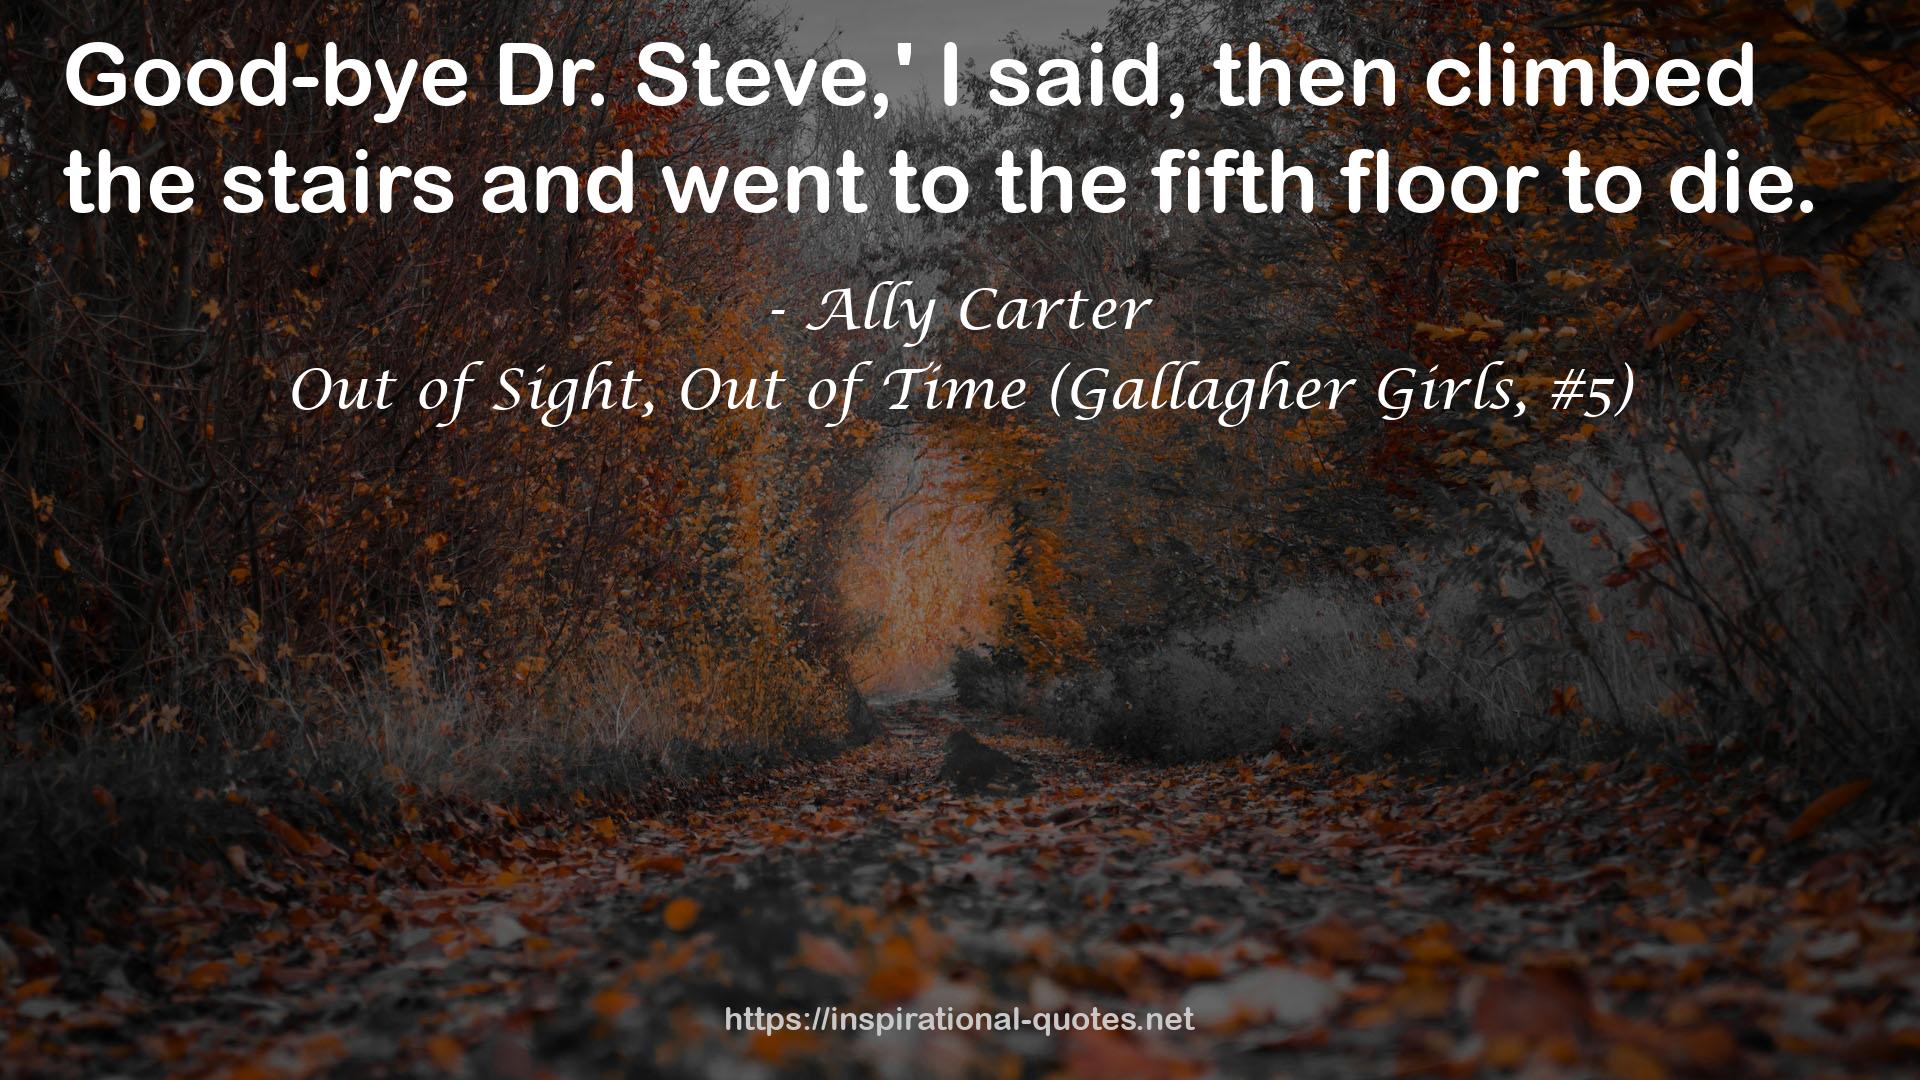 Out of Sight, Out of Time (Gallagher Girls, #5) QUOTES